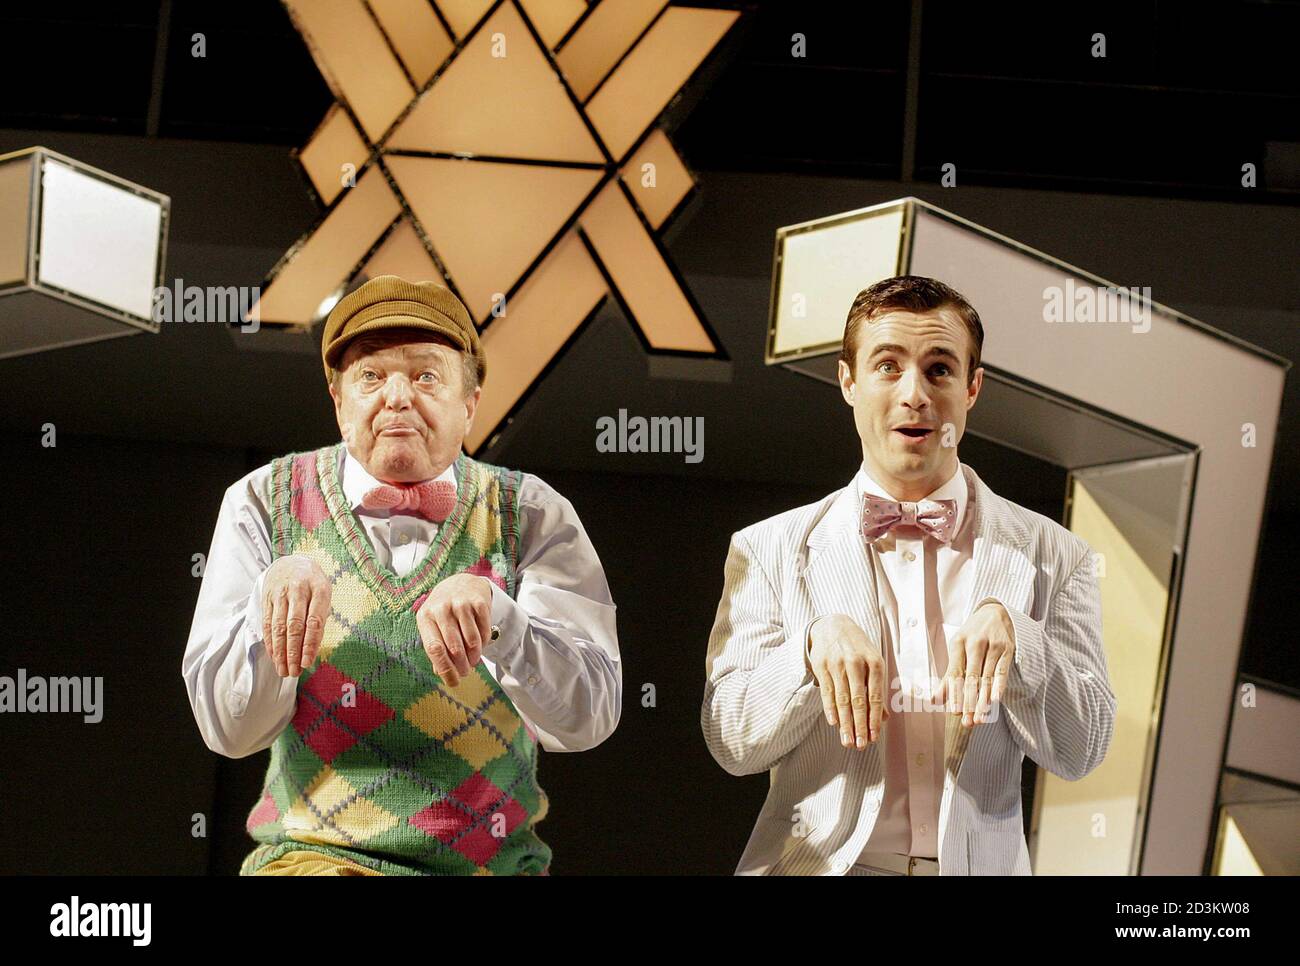 l-r:  James Bolam (J B Biggley), Joe McFadden (J Pierrepont Finch) in HOW TO SUCCEED IN BUSINESS WITHOUT REALLY TRYING at the Chichester Festival Theatre, West Sussex, England  05/05/2005  music & lyrics: Frank Loesser  book: Abe Burrows, Jack Weinstock & Willie Gilbert  design: Francis O'Connor  lighting: Chris Ellis  choreographer: Stephen Mear  director: Martin Duncan Stock Photo